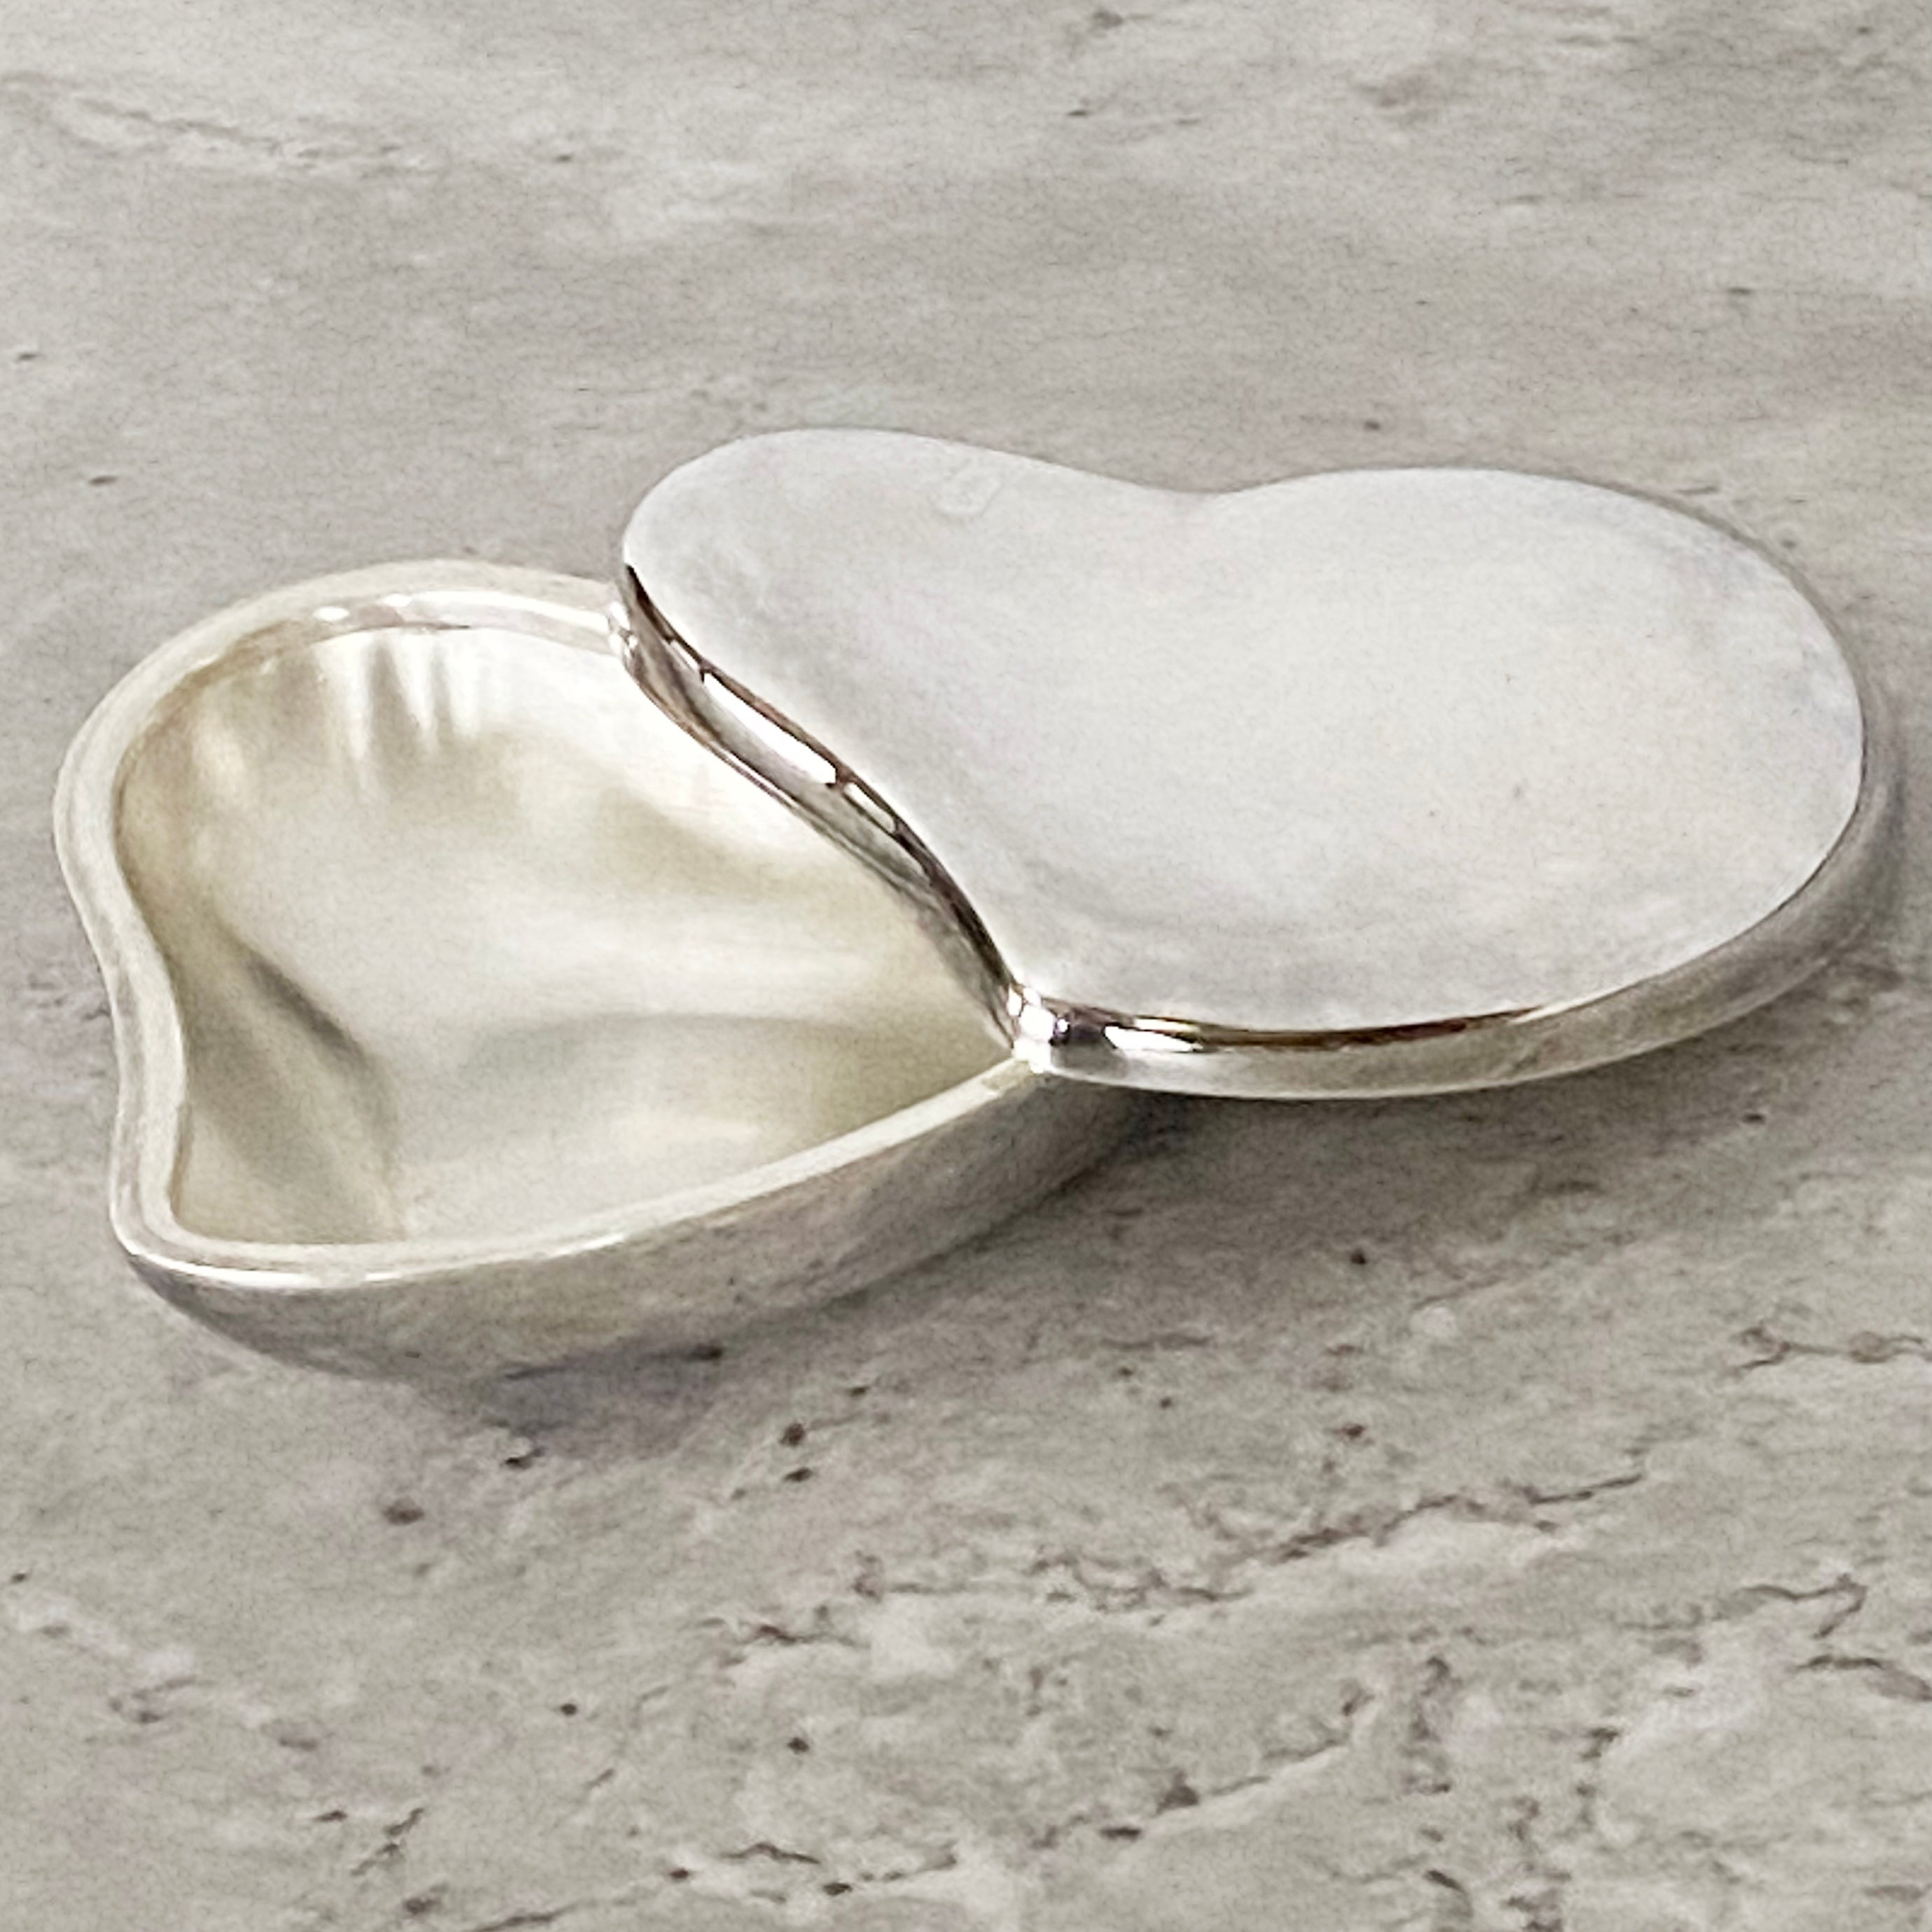 Iconic functional sterling silver freeform heart box.
Unlike the current small box, this is a 1980s original, large 4